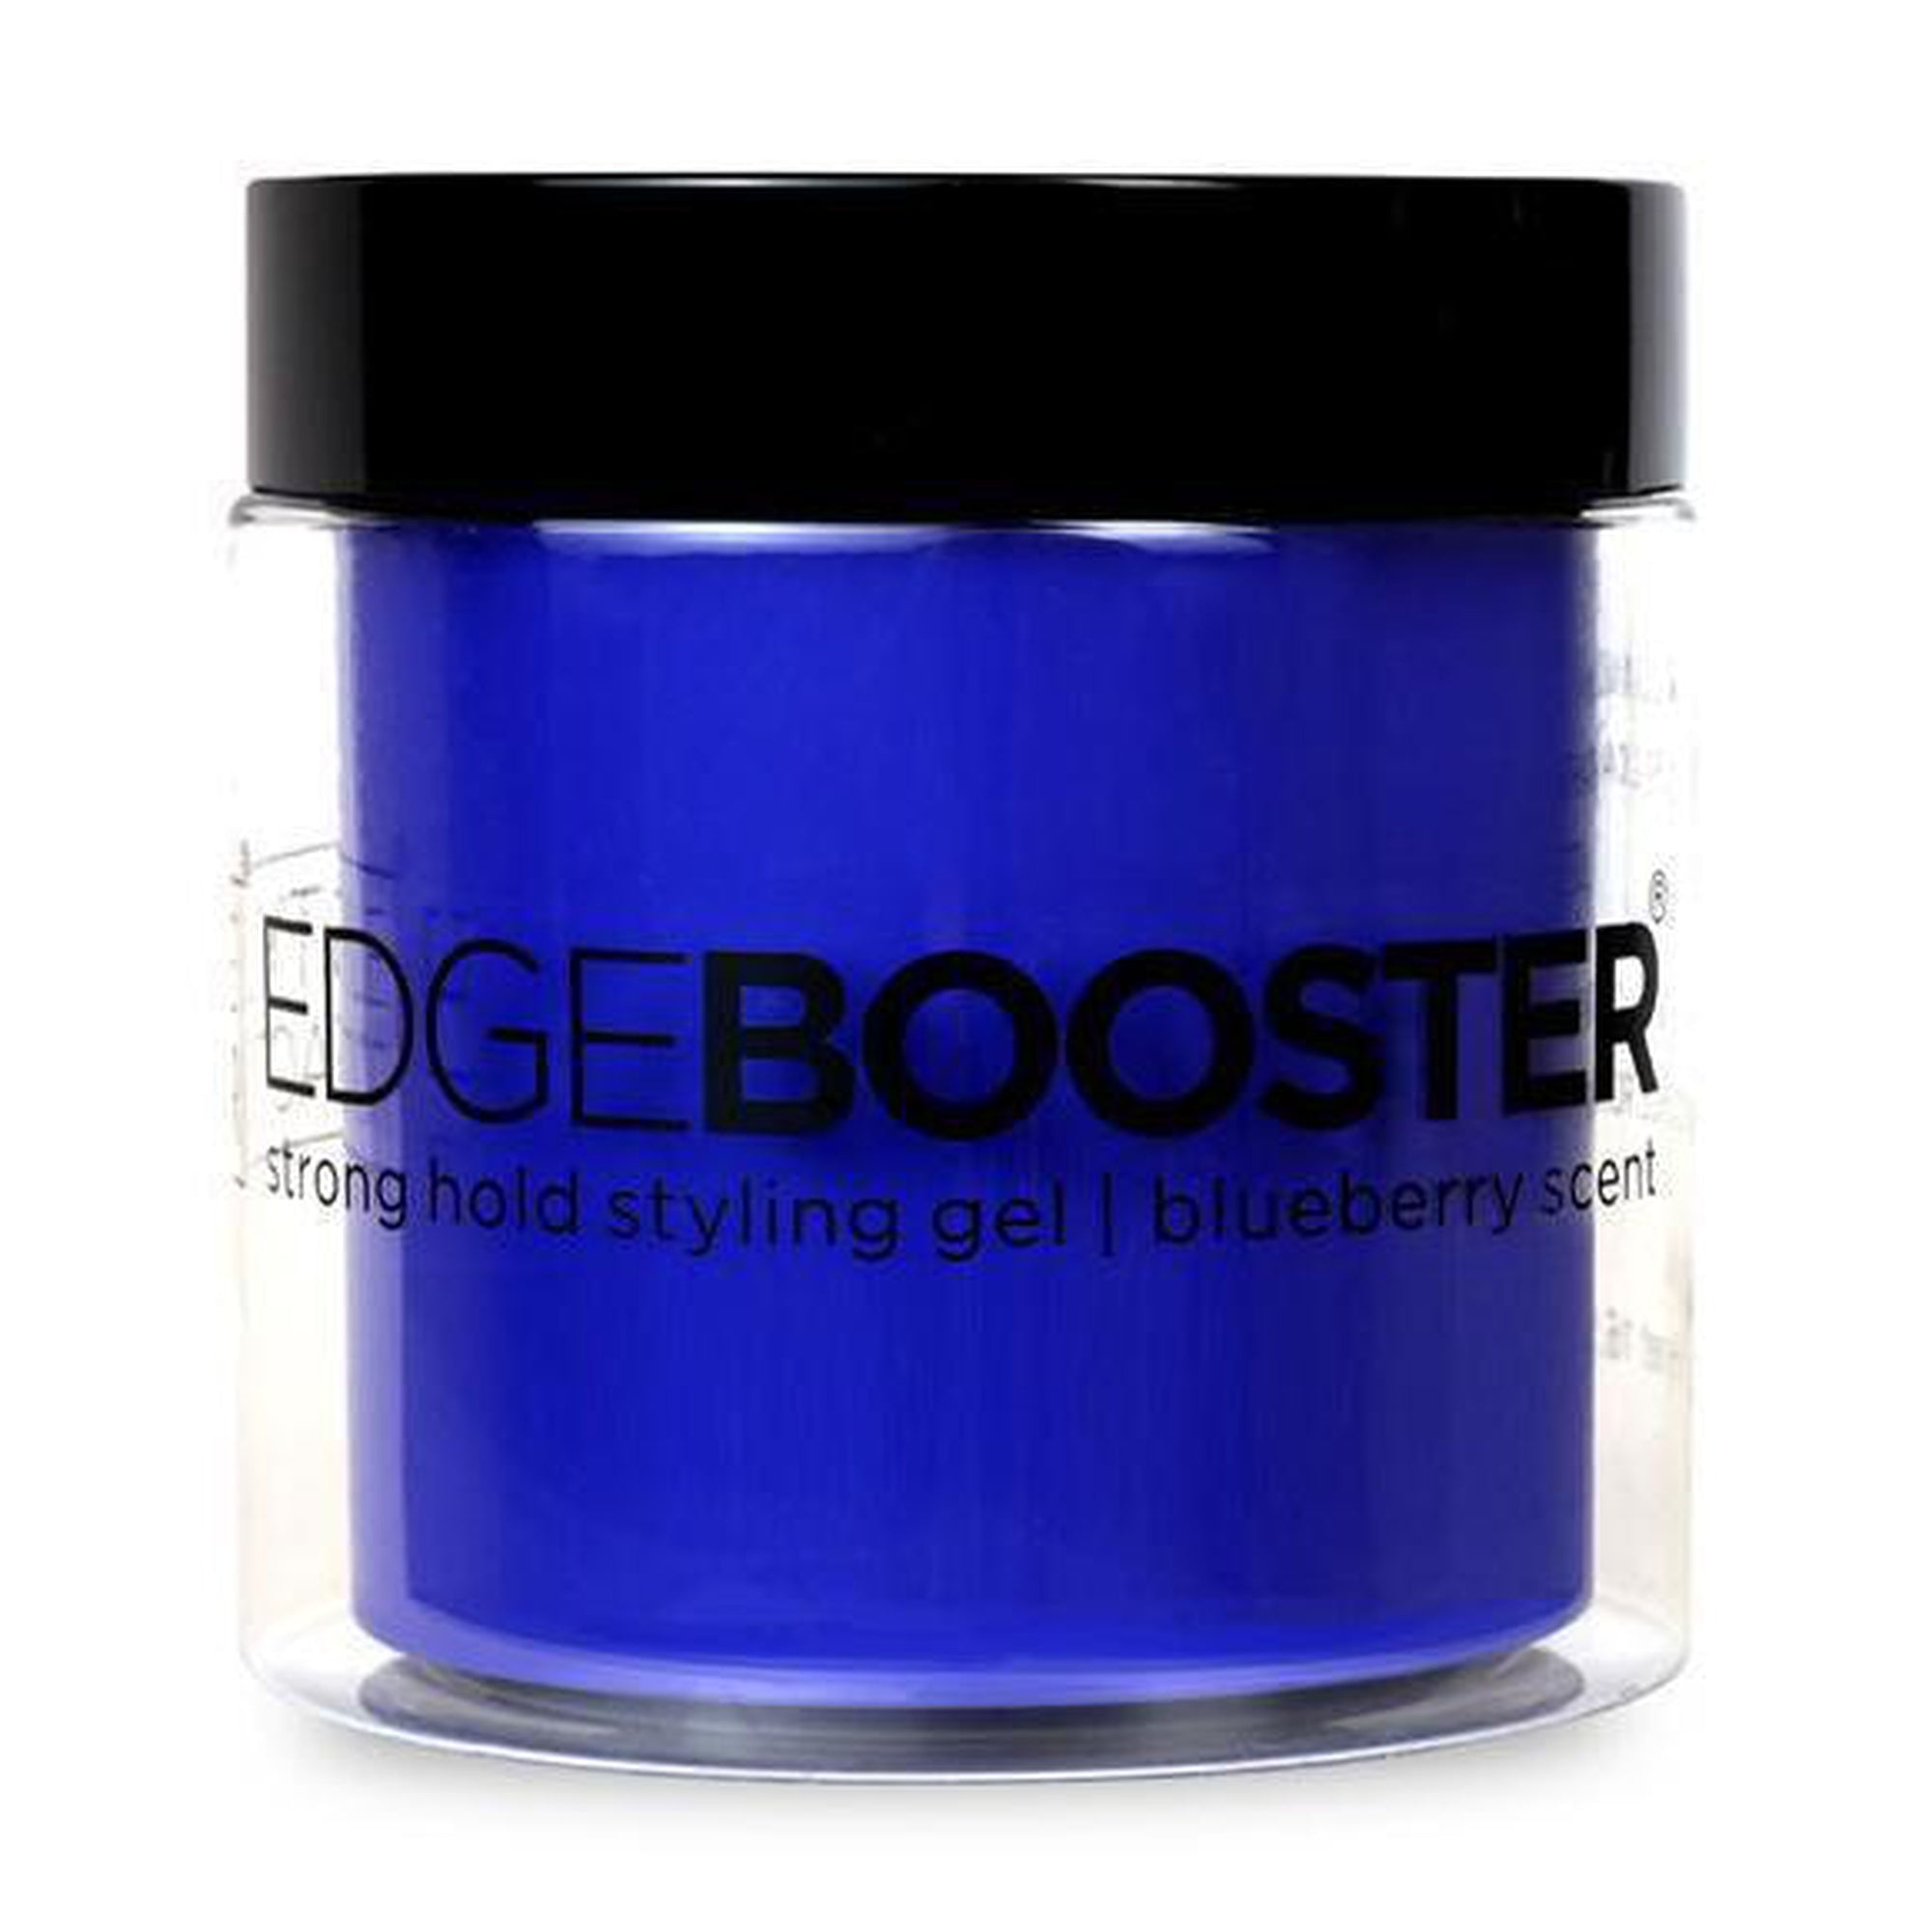 Edge Booster by Style Factor Review. Mission Booster Style.